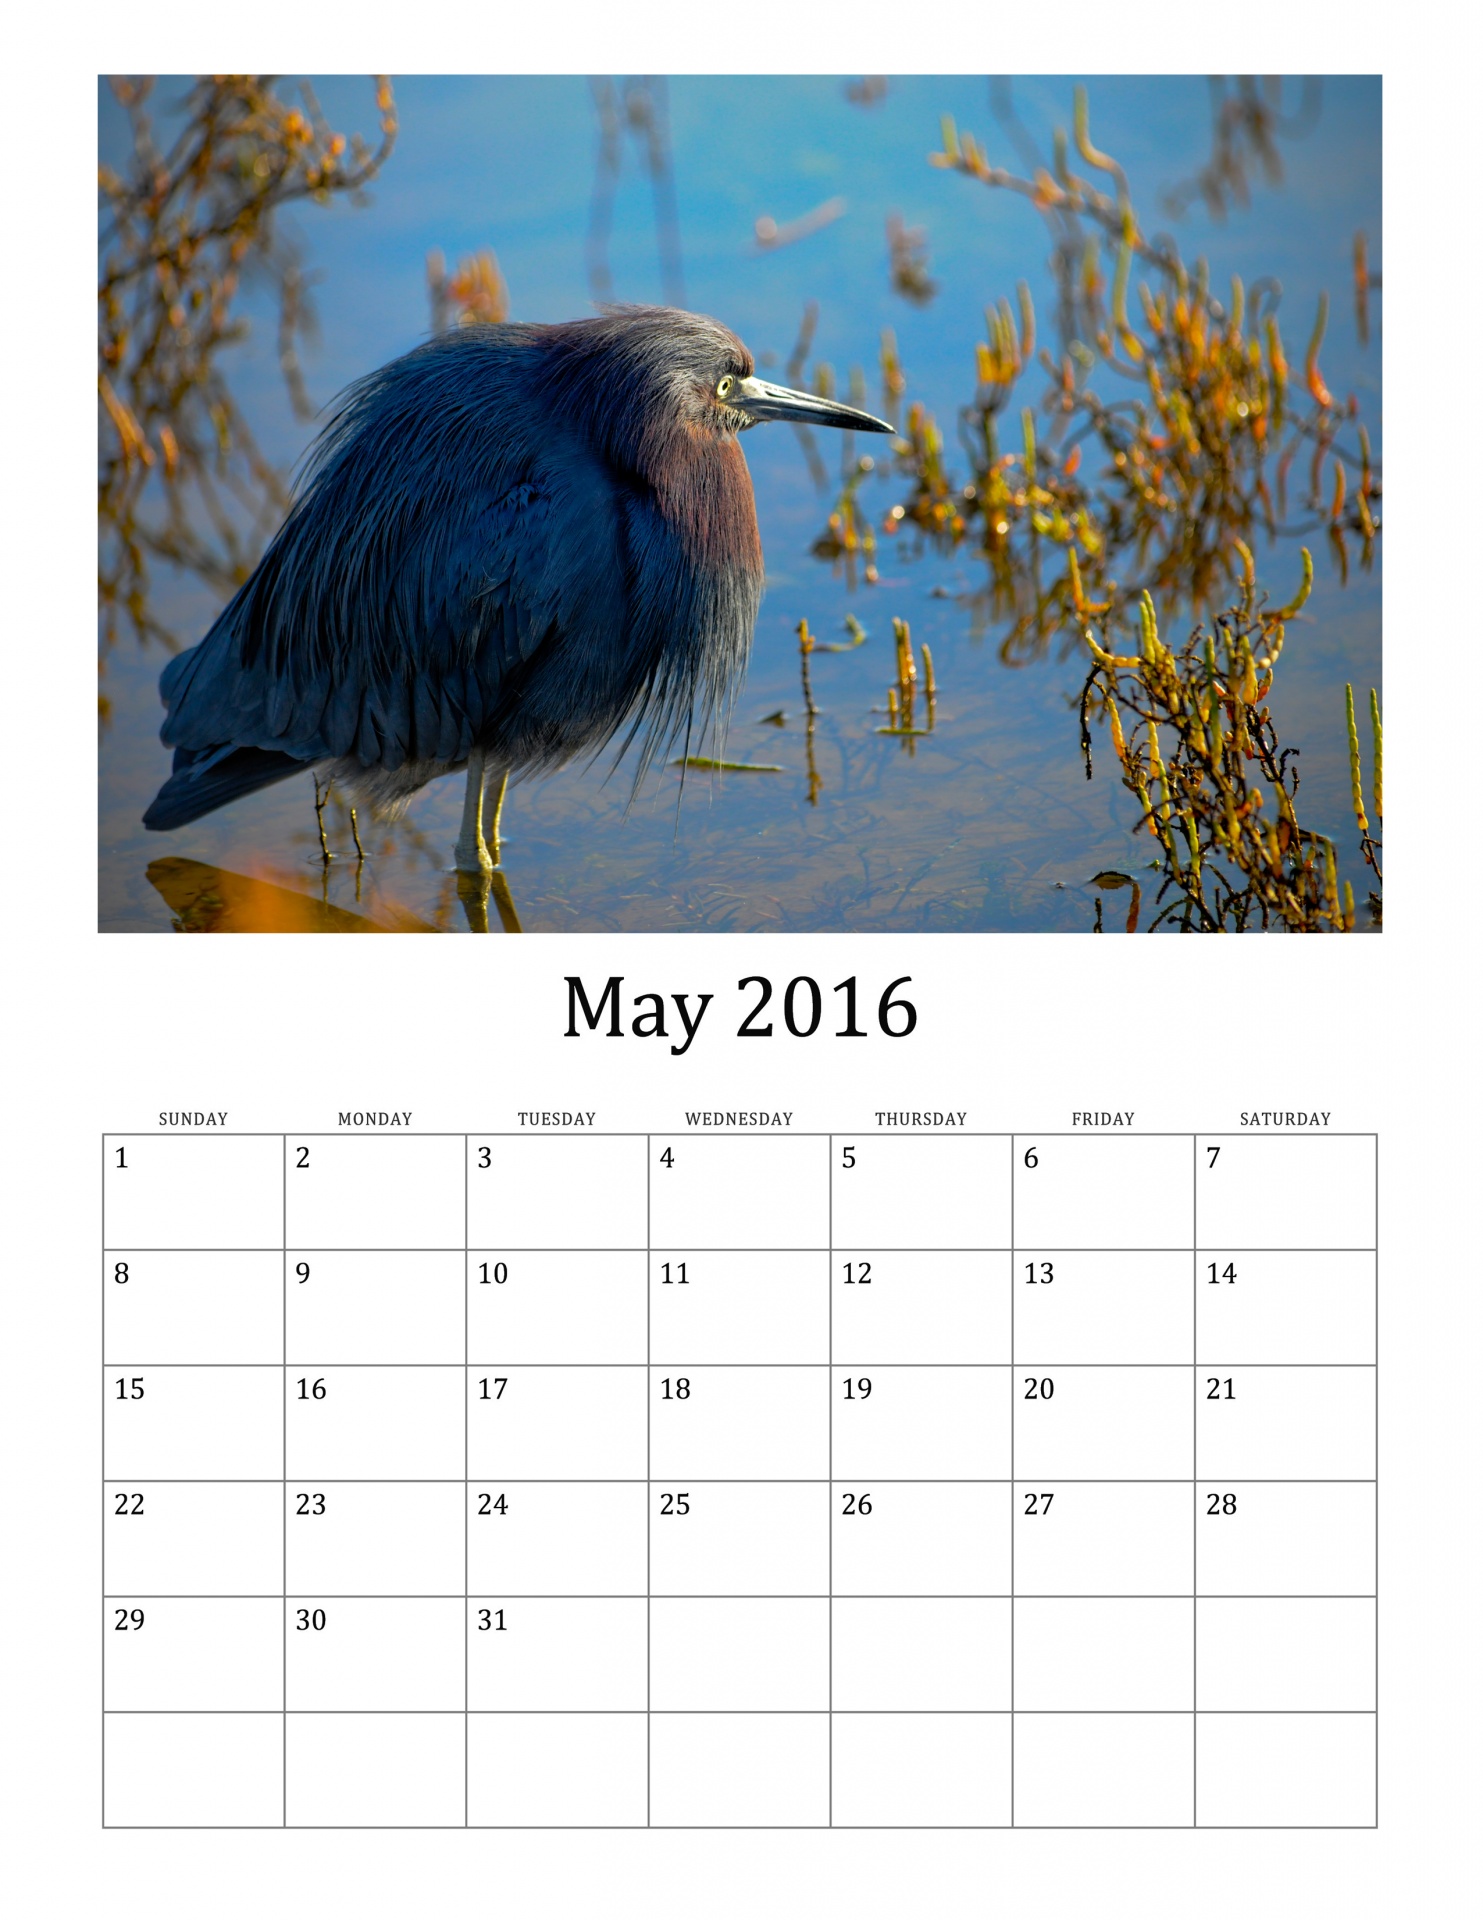 2016 calendar for month of May featuring wild birds